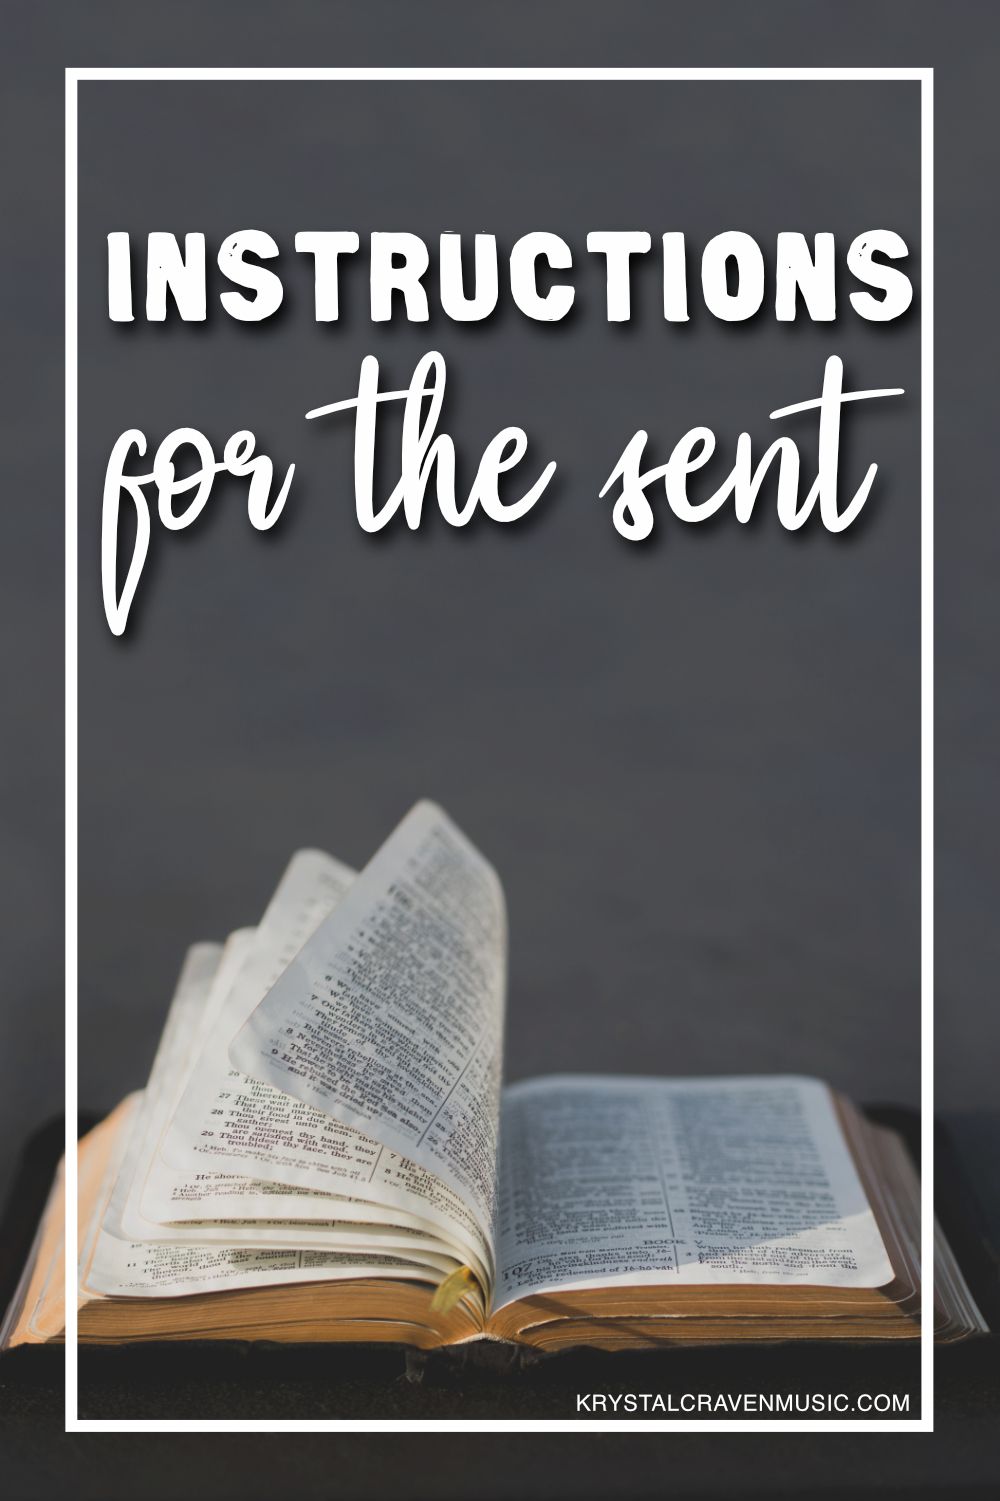 The title text "Instructions for the sent" in a large white font appearing with a Bible spread open with some pages being flipped over by wind.